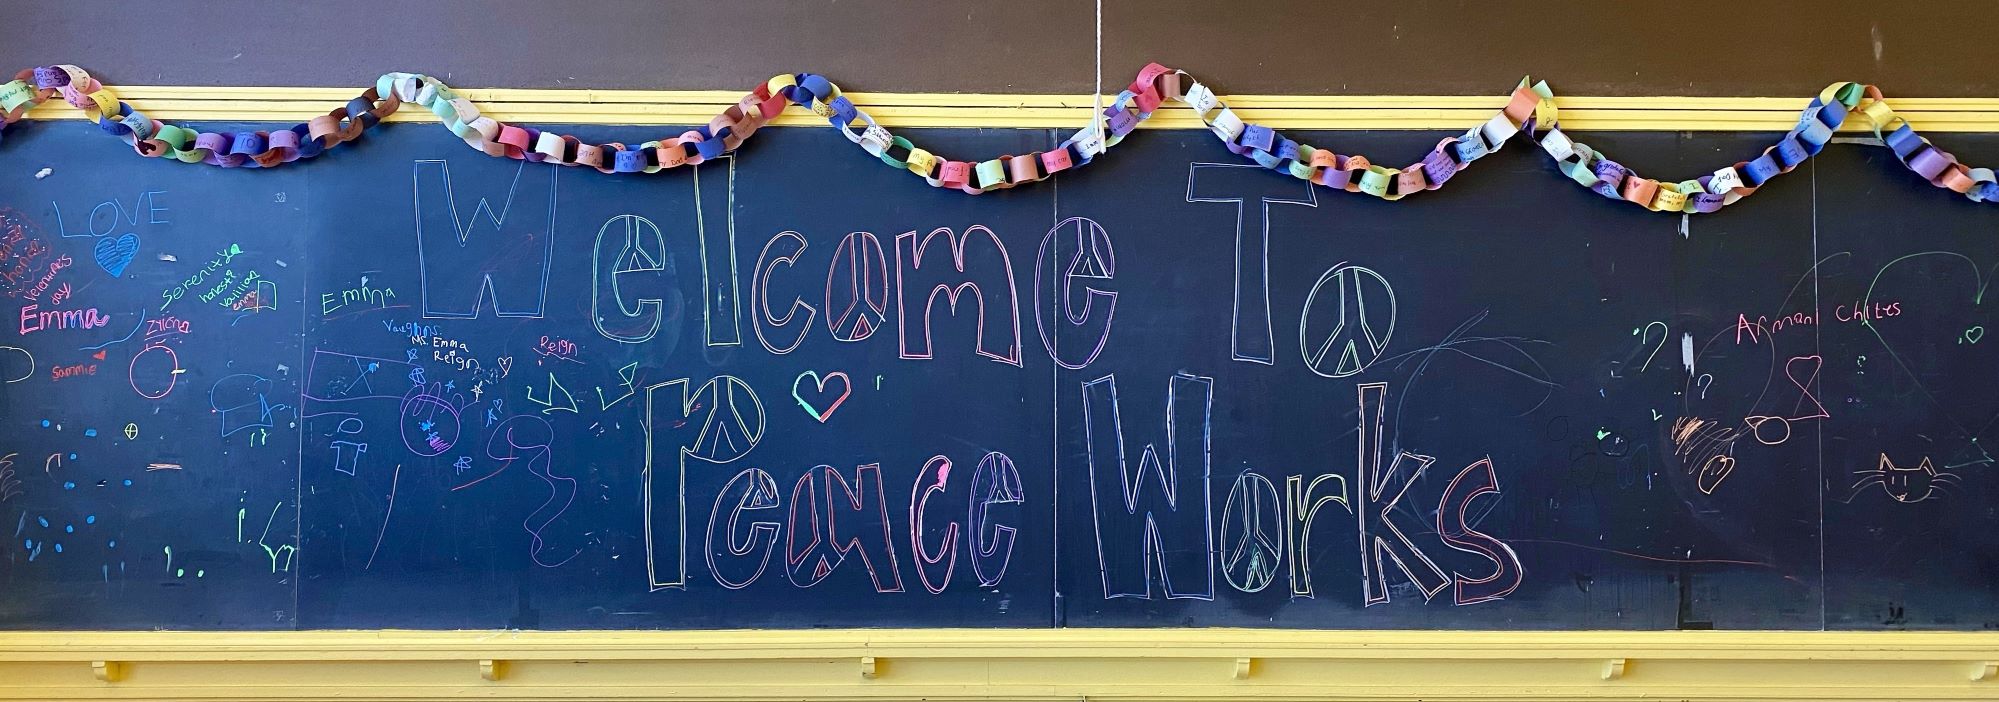 chalkboard welcome to peace works